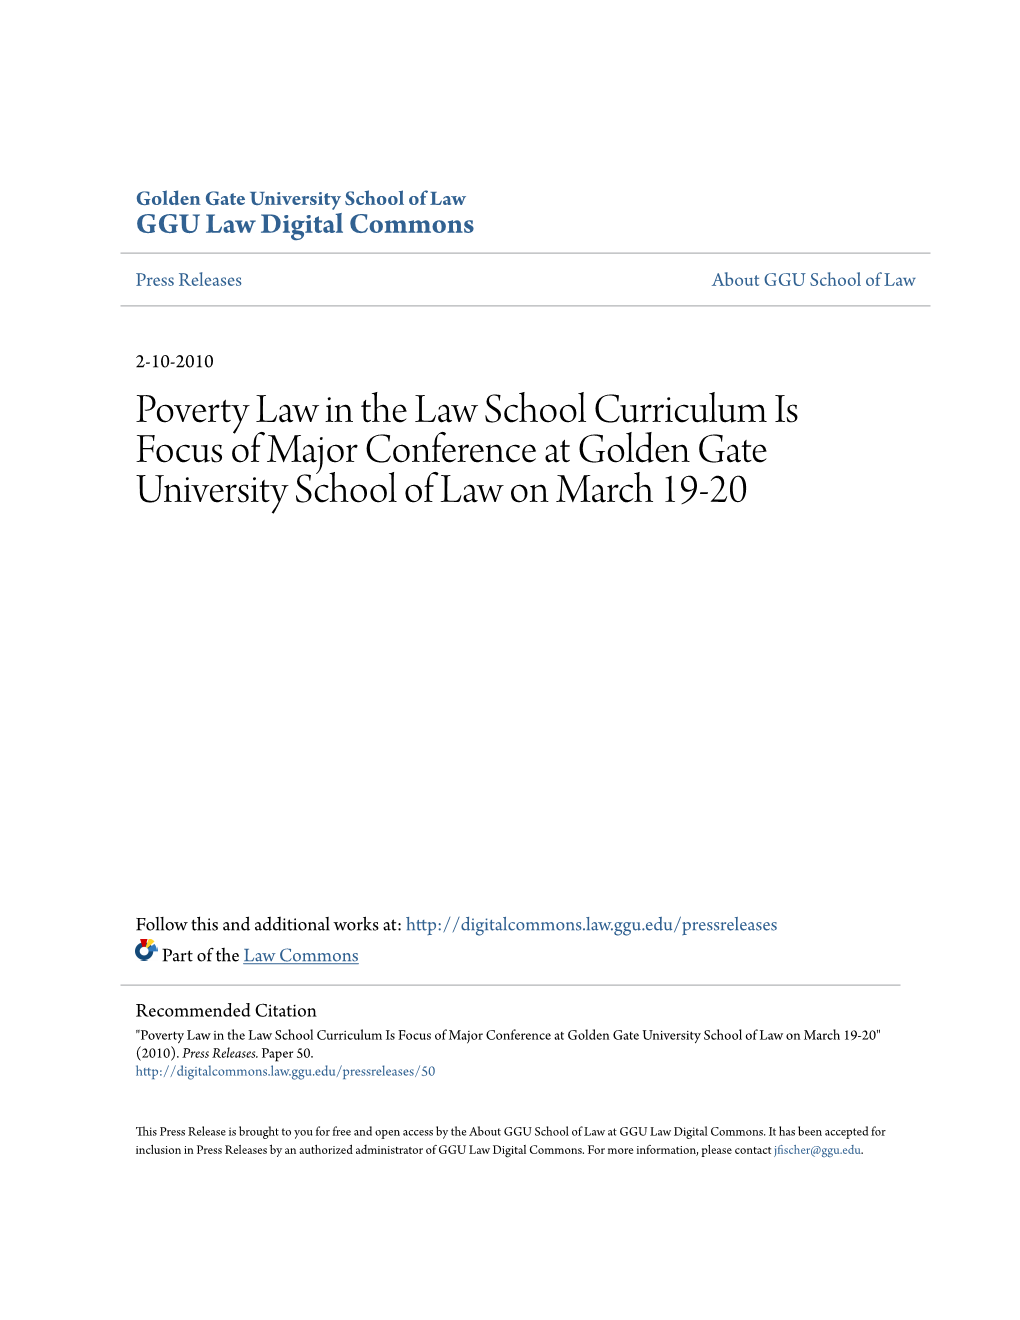 Poverty Law in the Law School Curriculum Is Focus of Major Conference at Golden Gate University School of Law on March 19-20